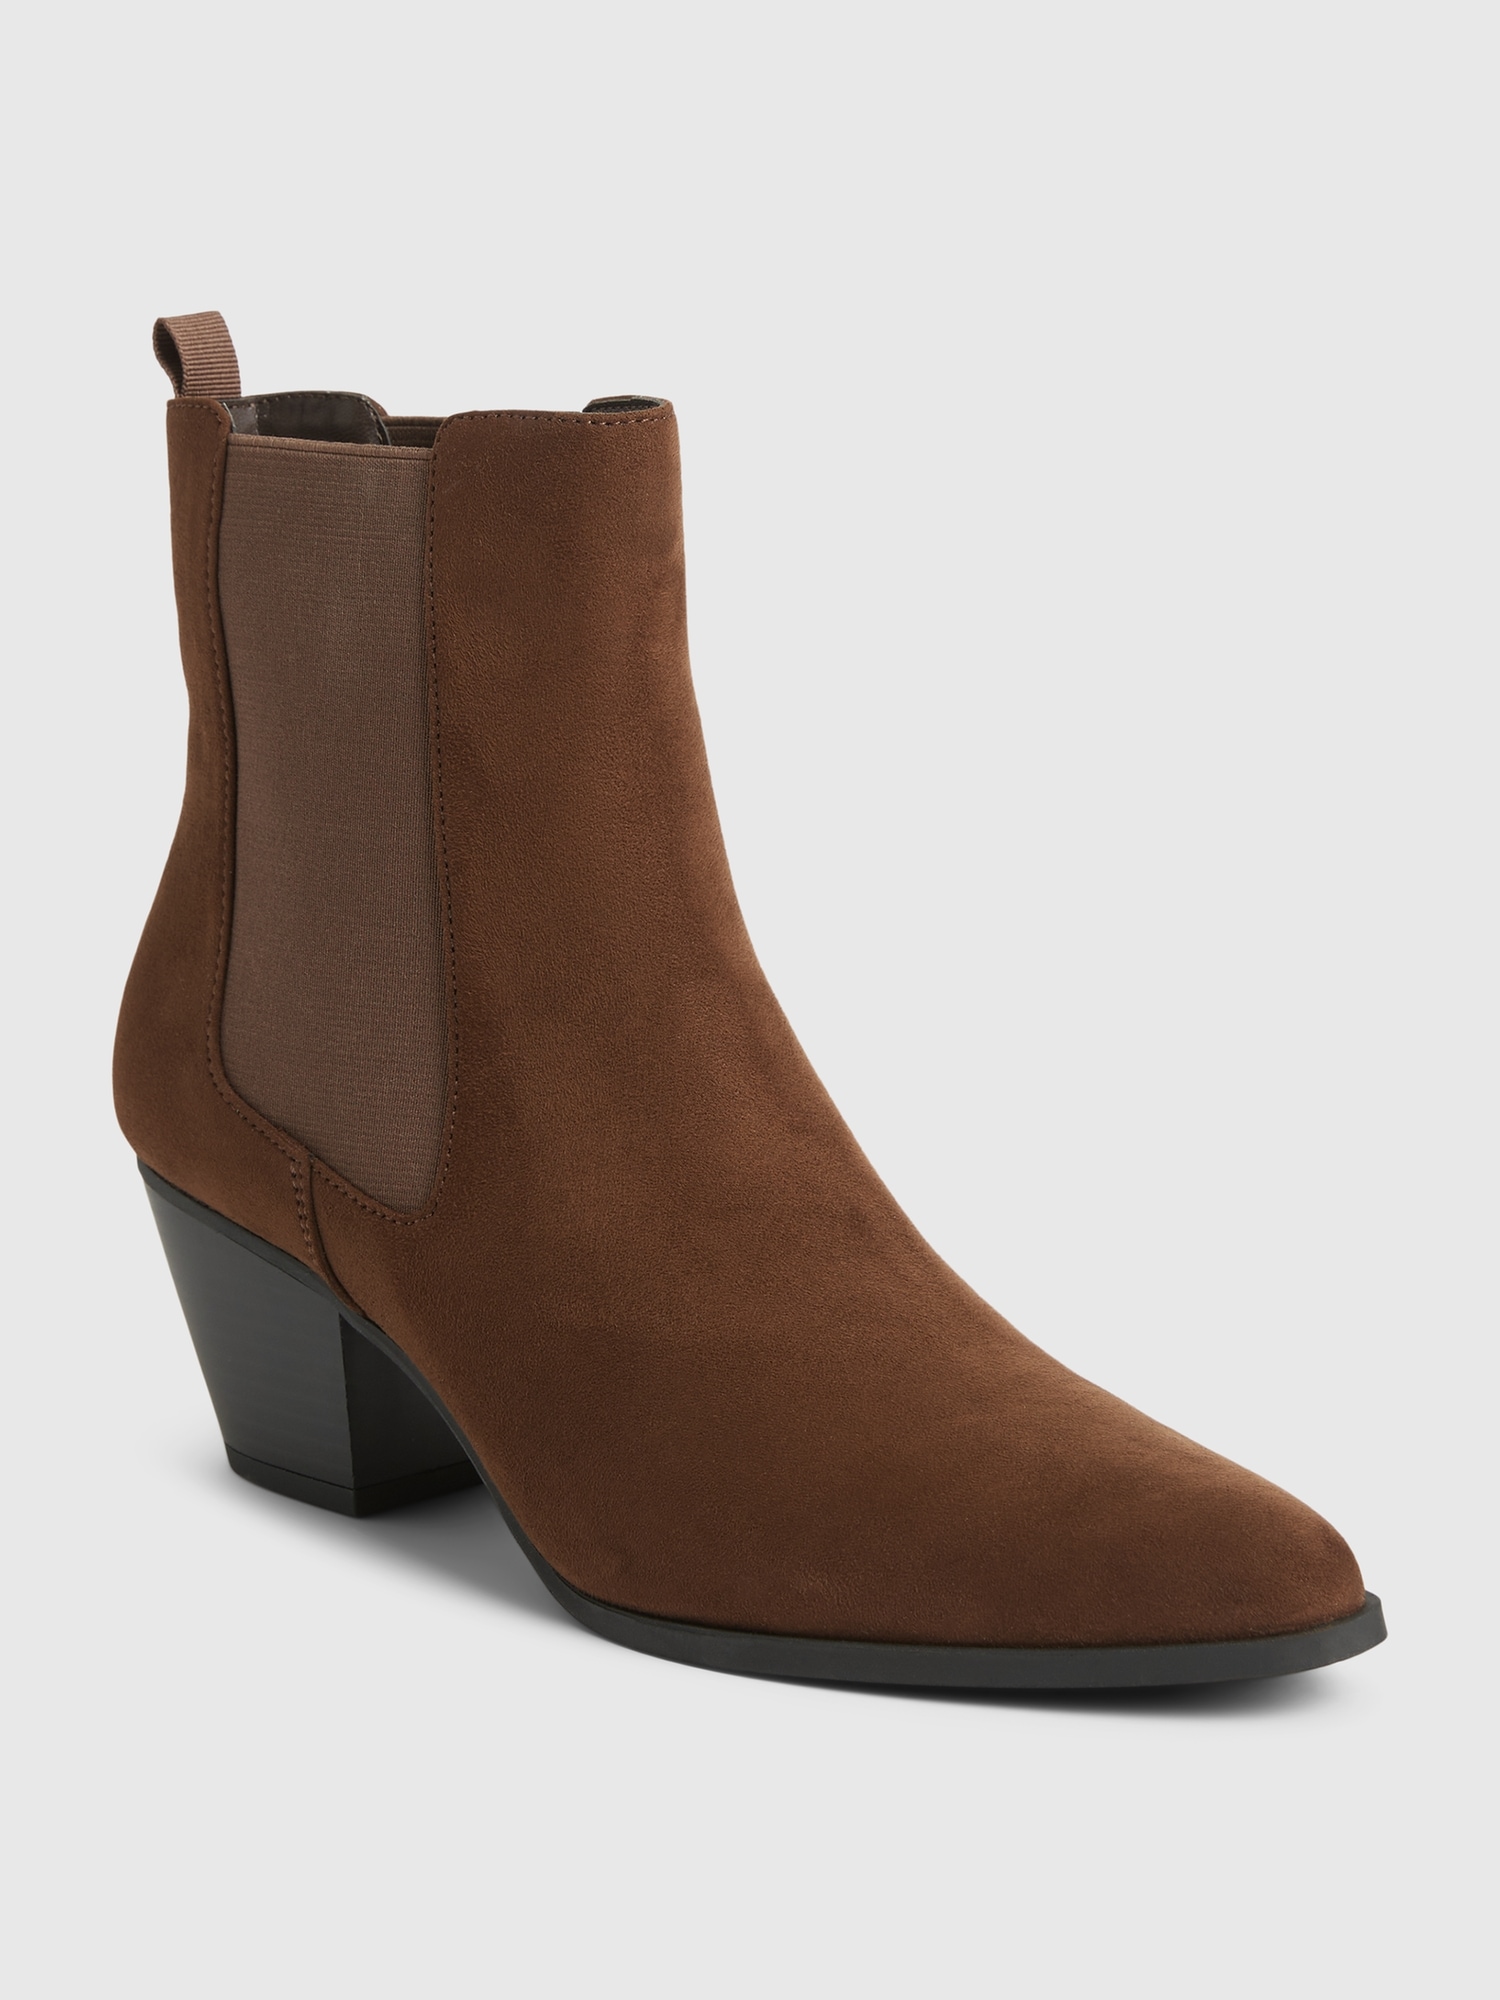 Gap Heeled Chelsea Boots In Earth Brown